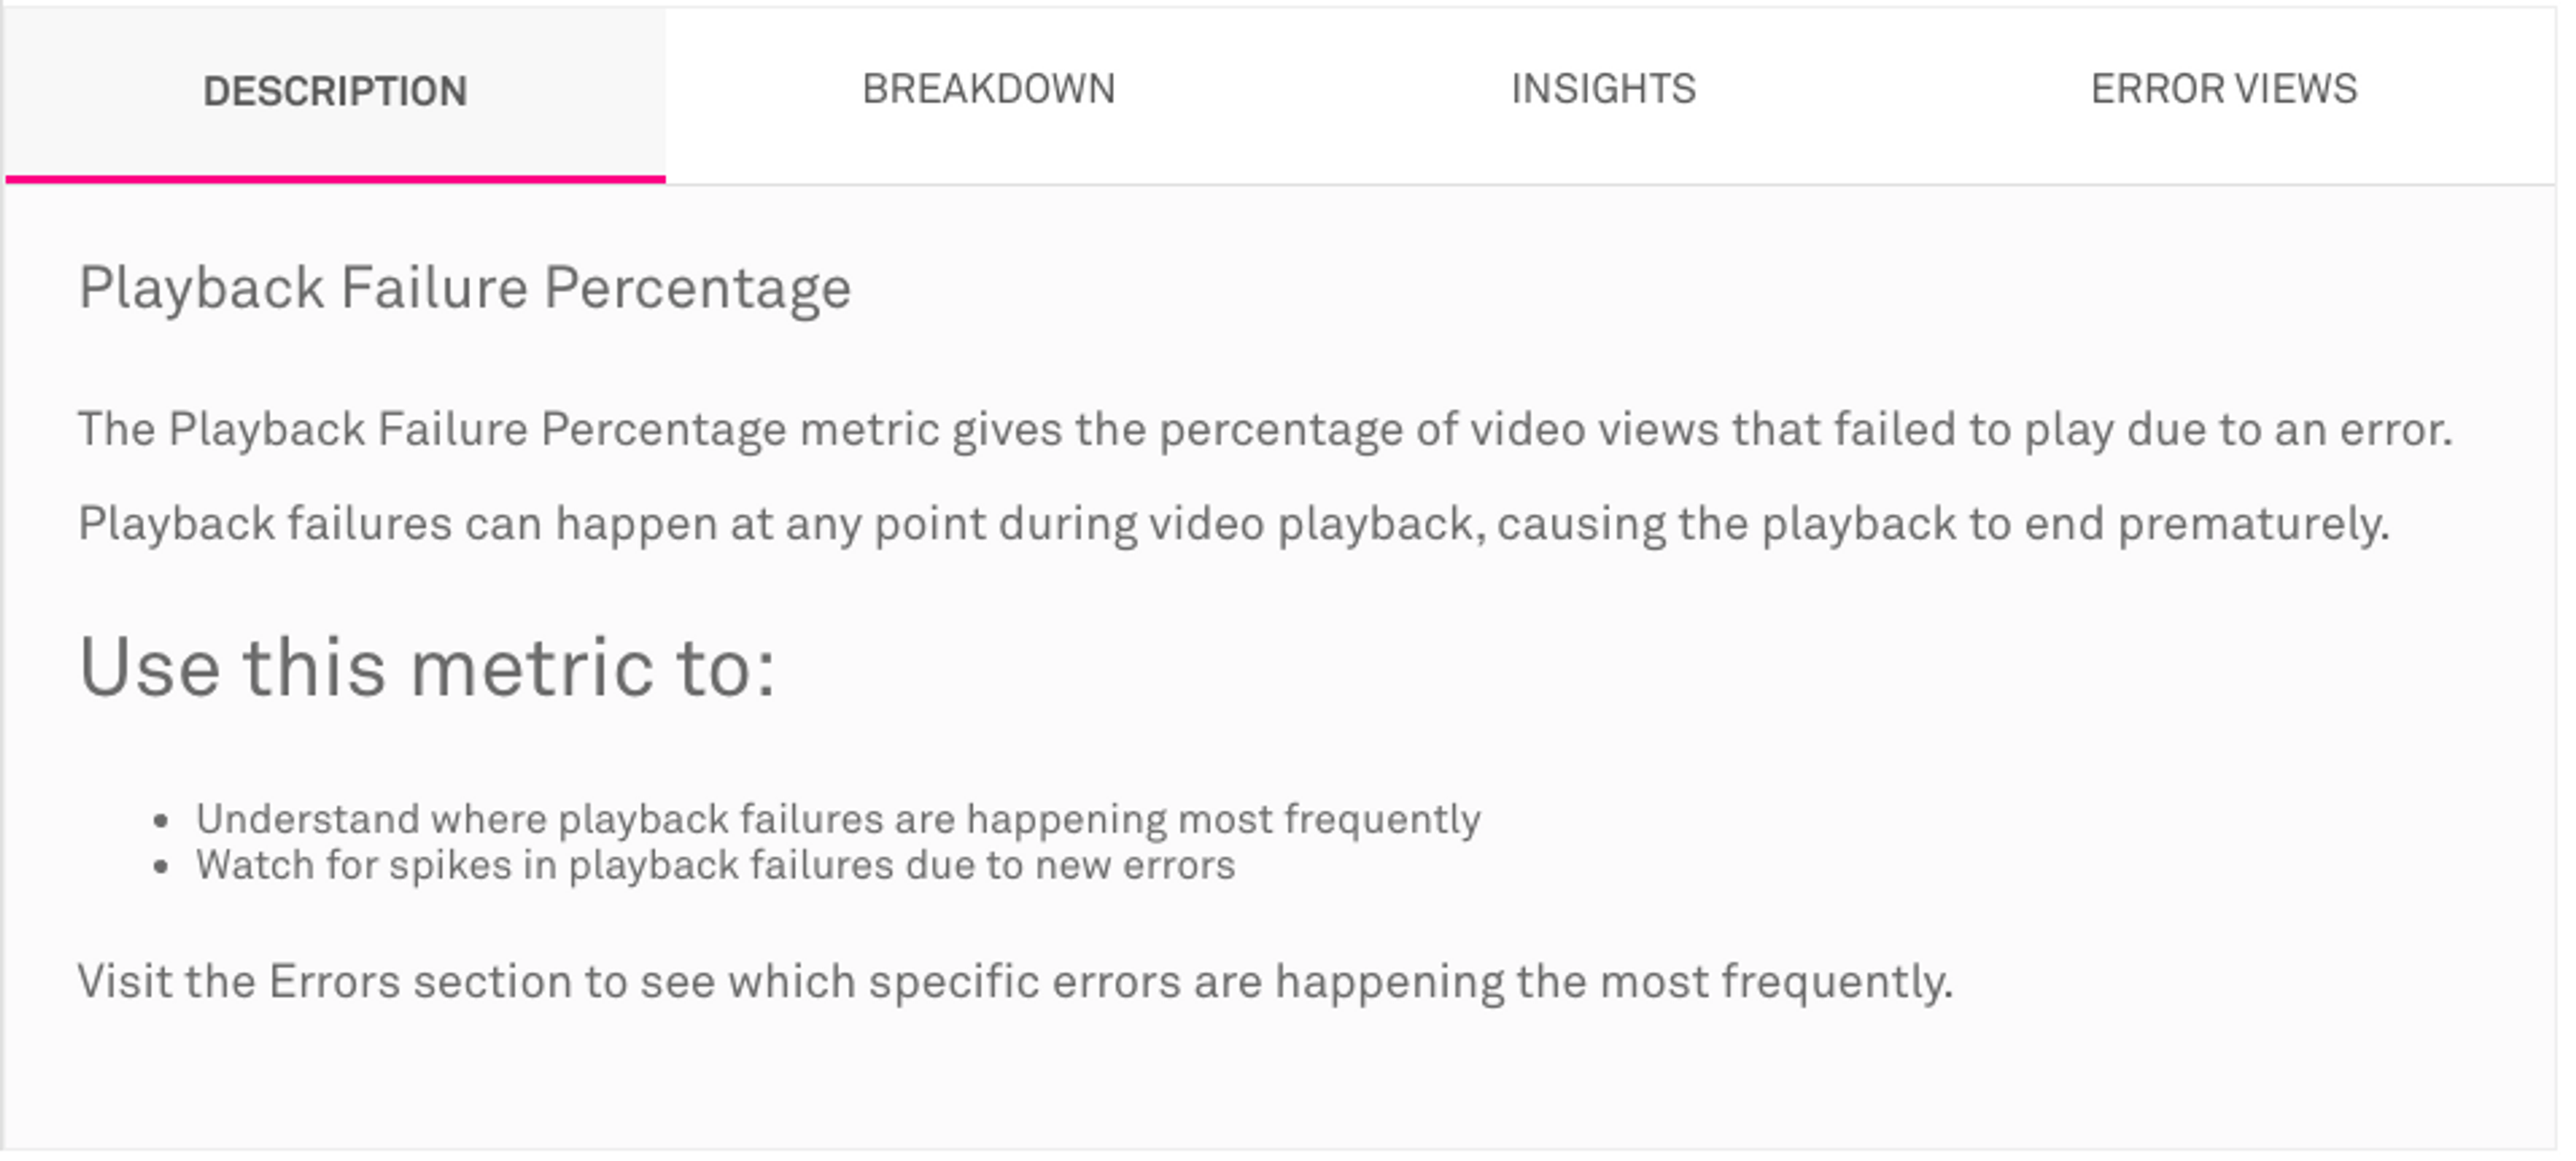 The Description Tab gives a concise definition of metrics including the Playback Failure Percentage